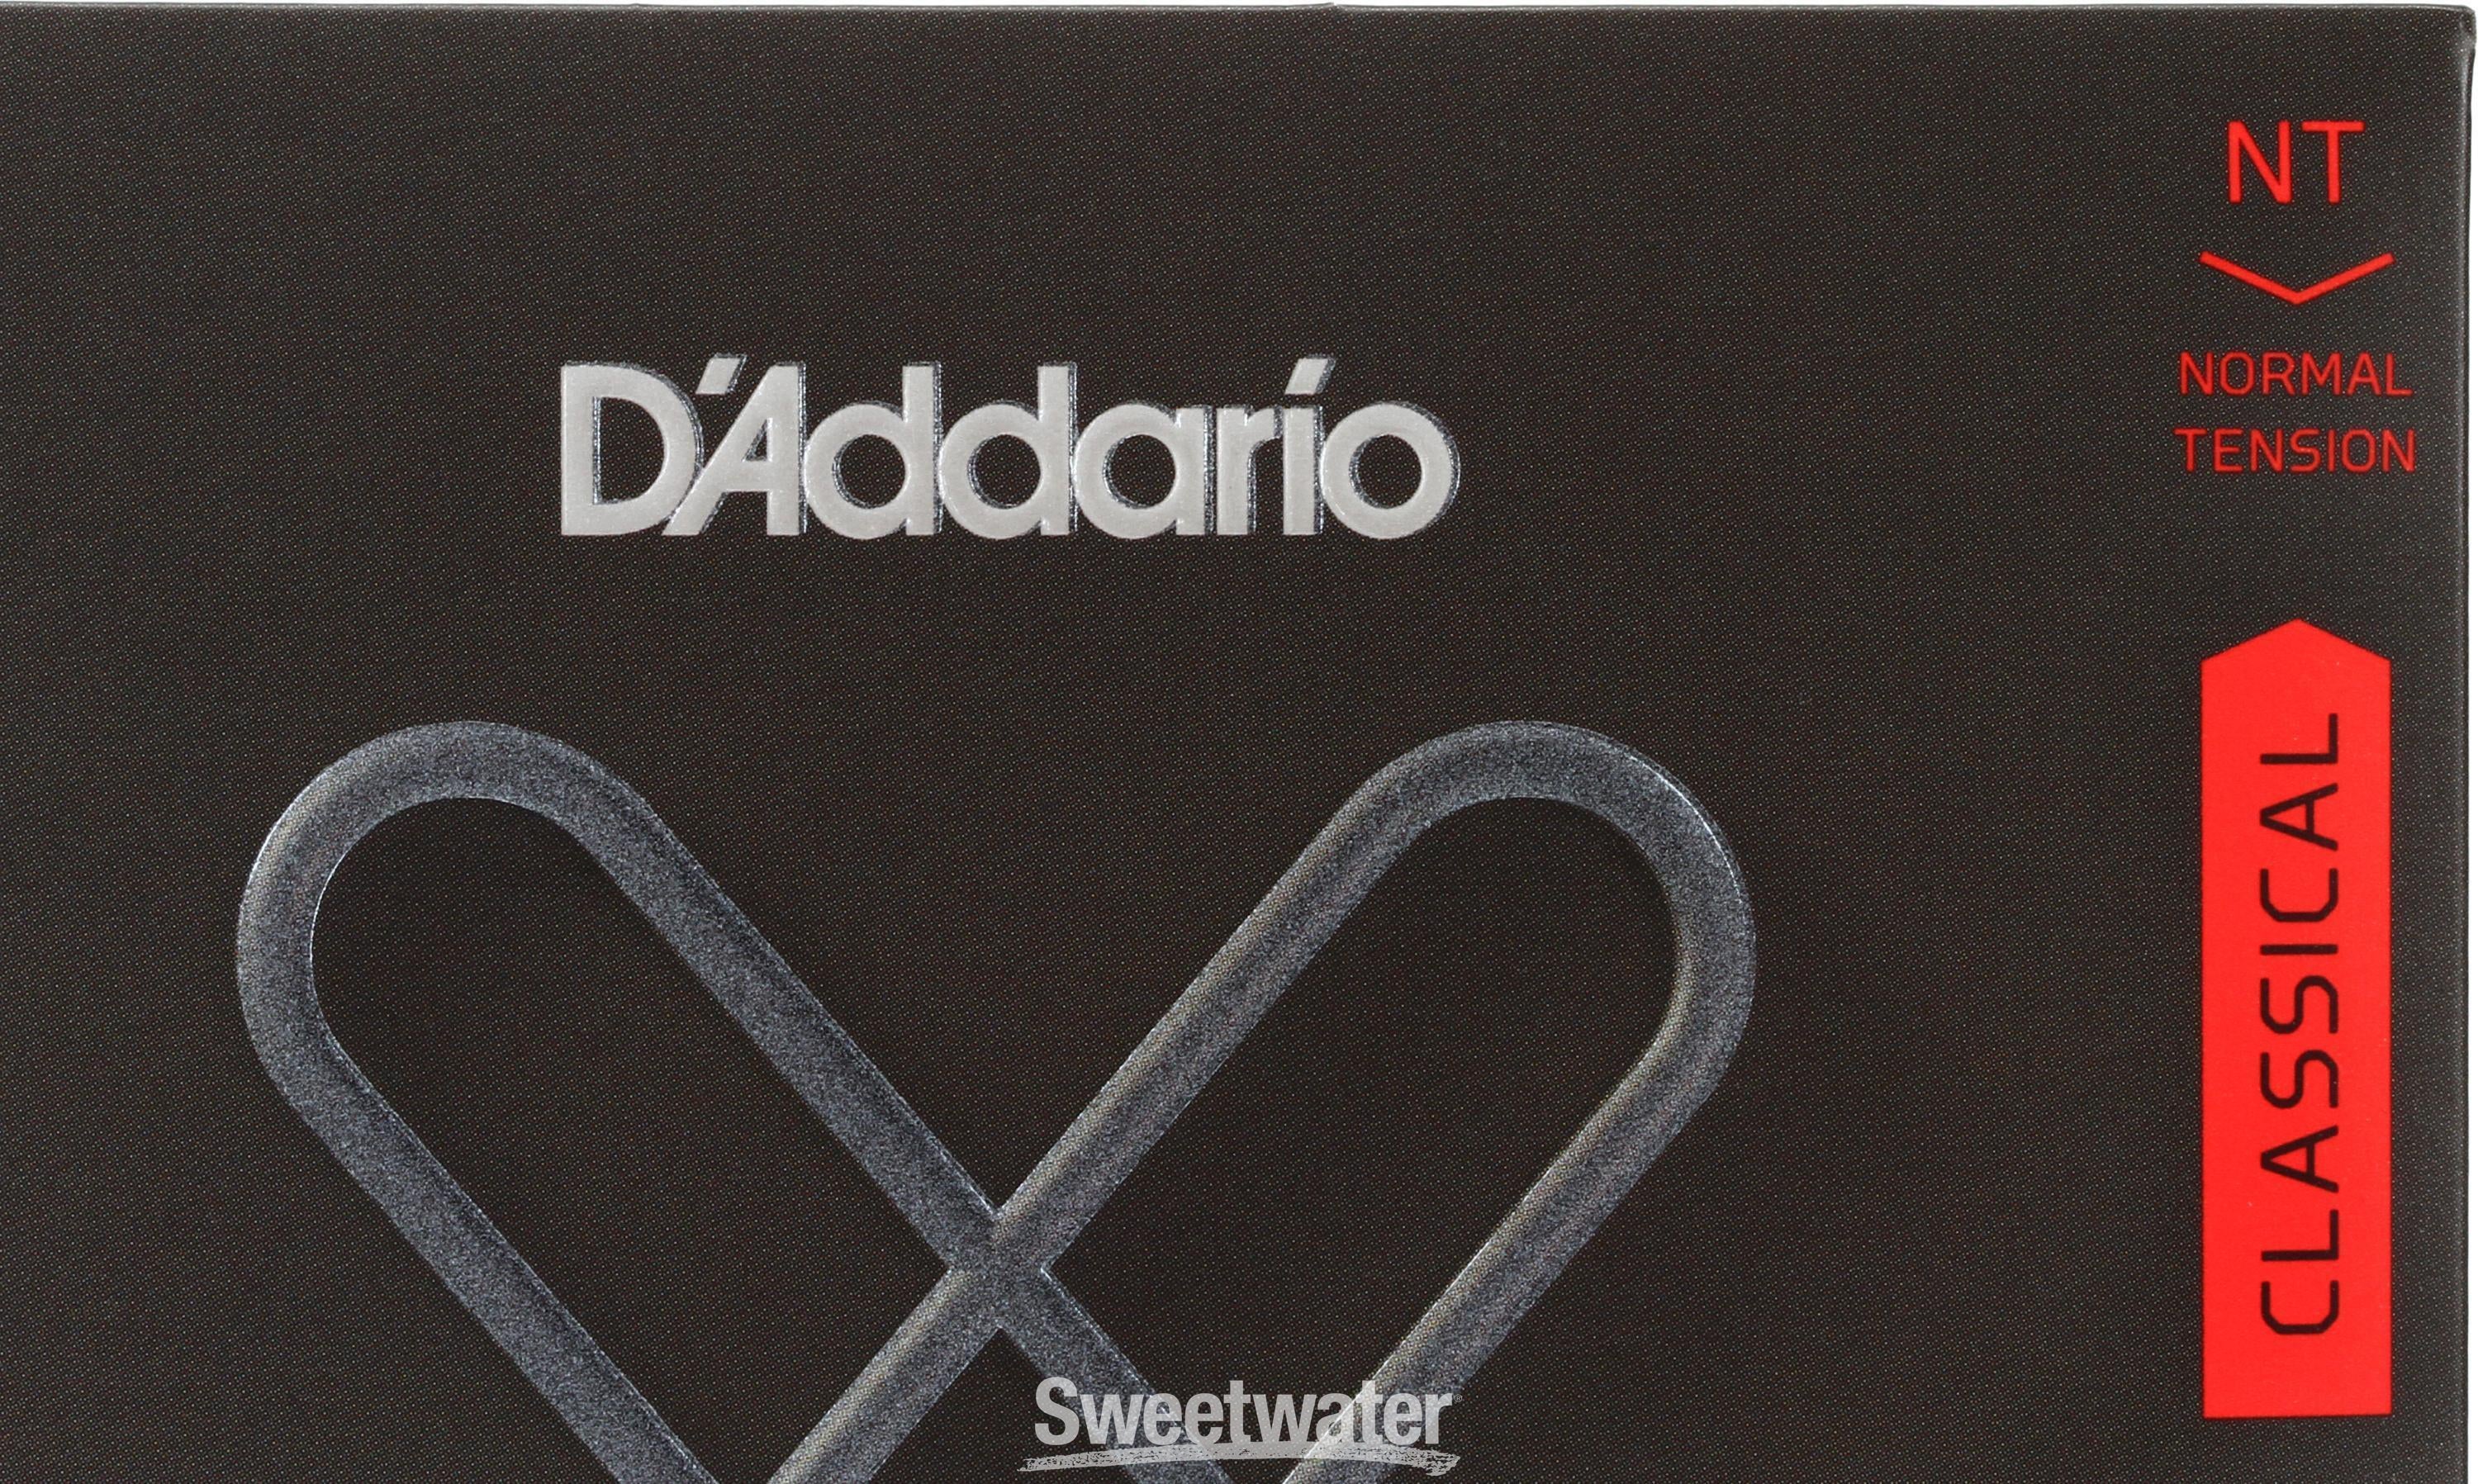 D'Addario XTC45 XT Silver-plated Classical Guitar Strings - Normal Tension